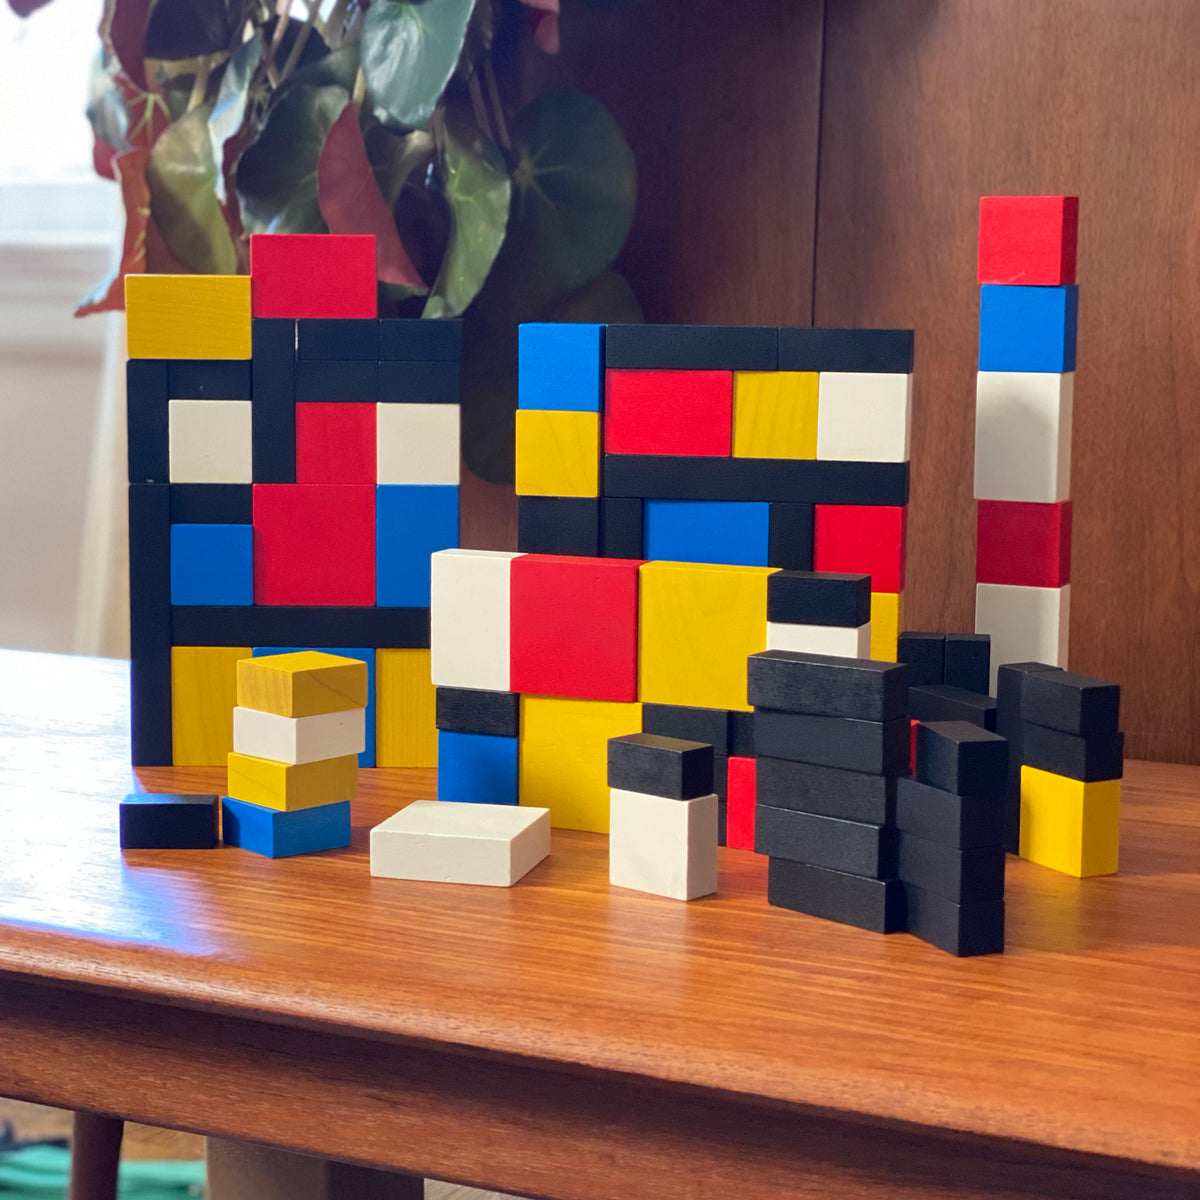 The Mondrian Blocks stacked on a table.